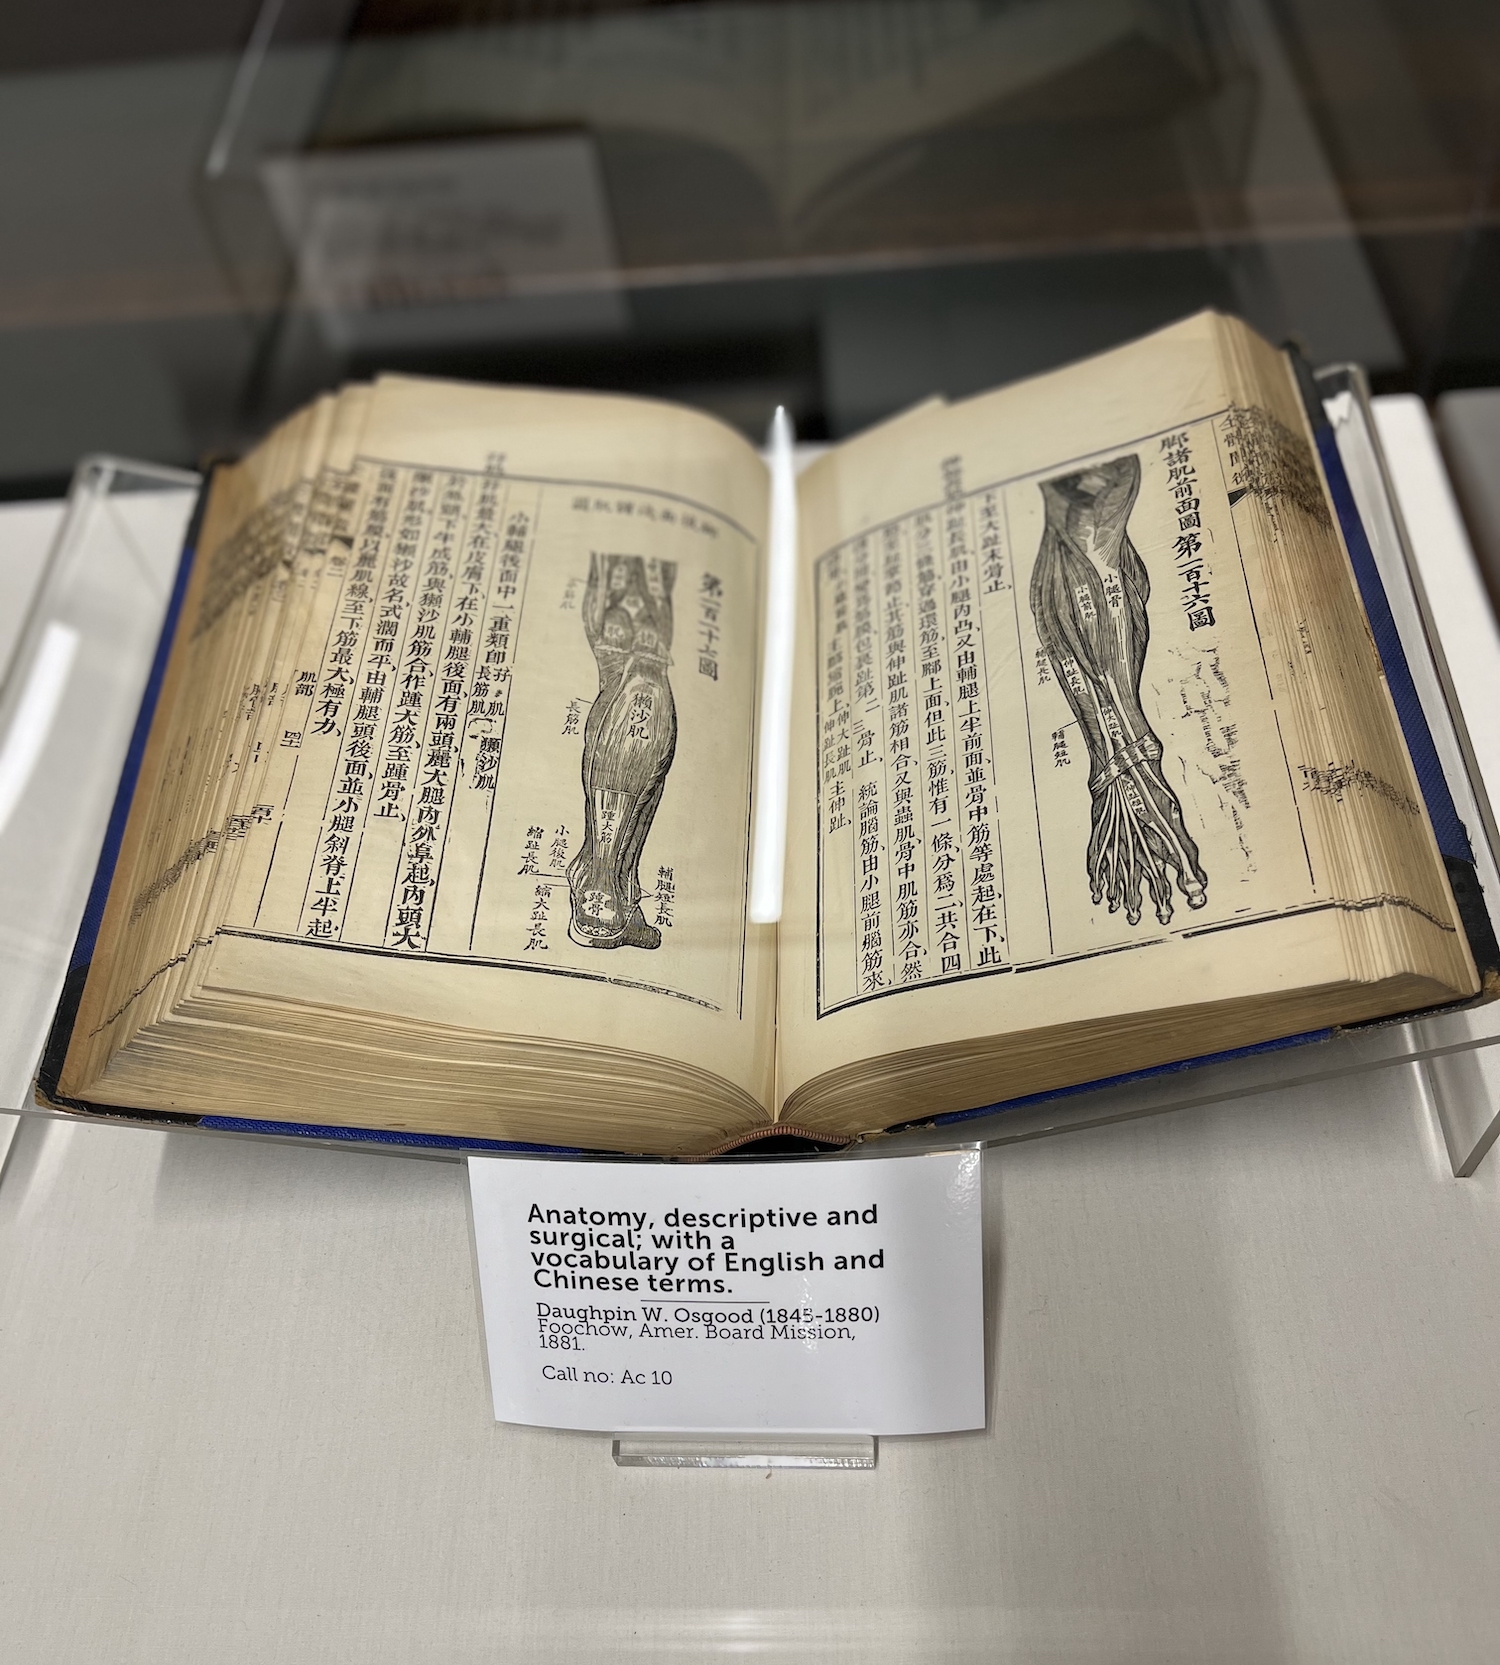 Inspecting American Medicine with the Historical Medical Library | Archives Deep Dive